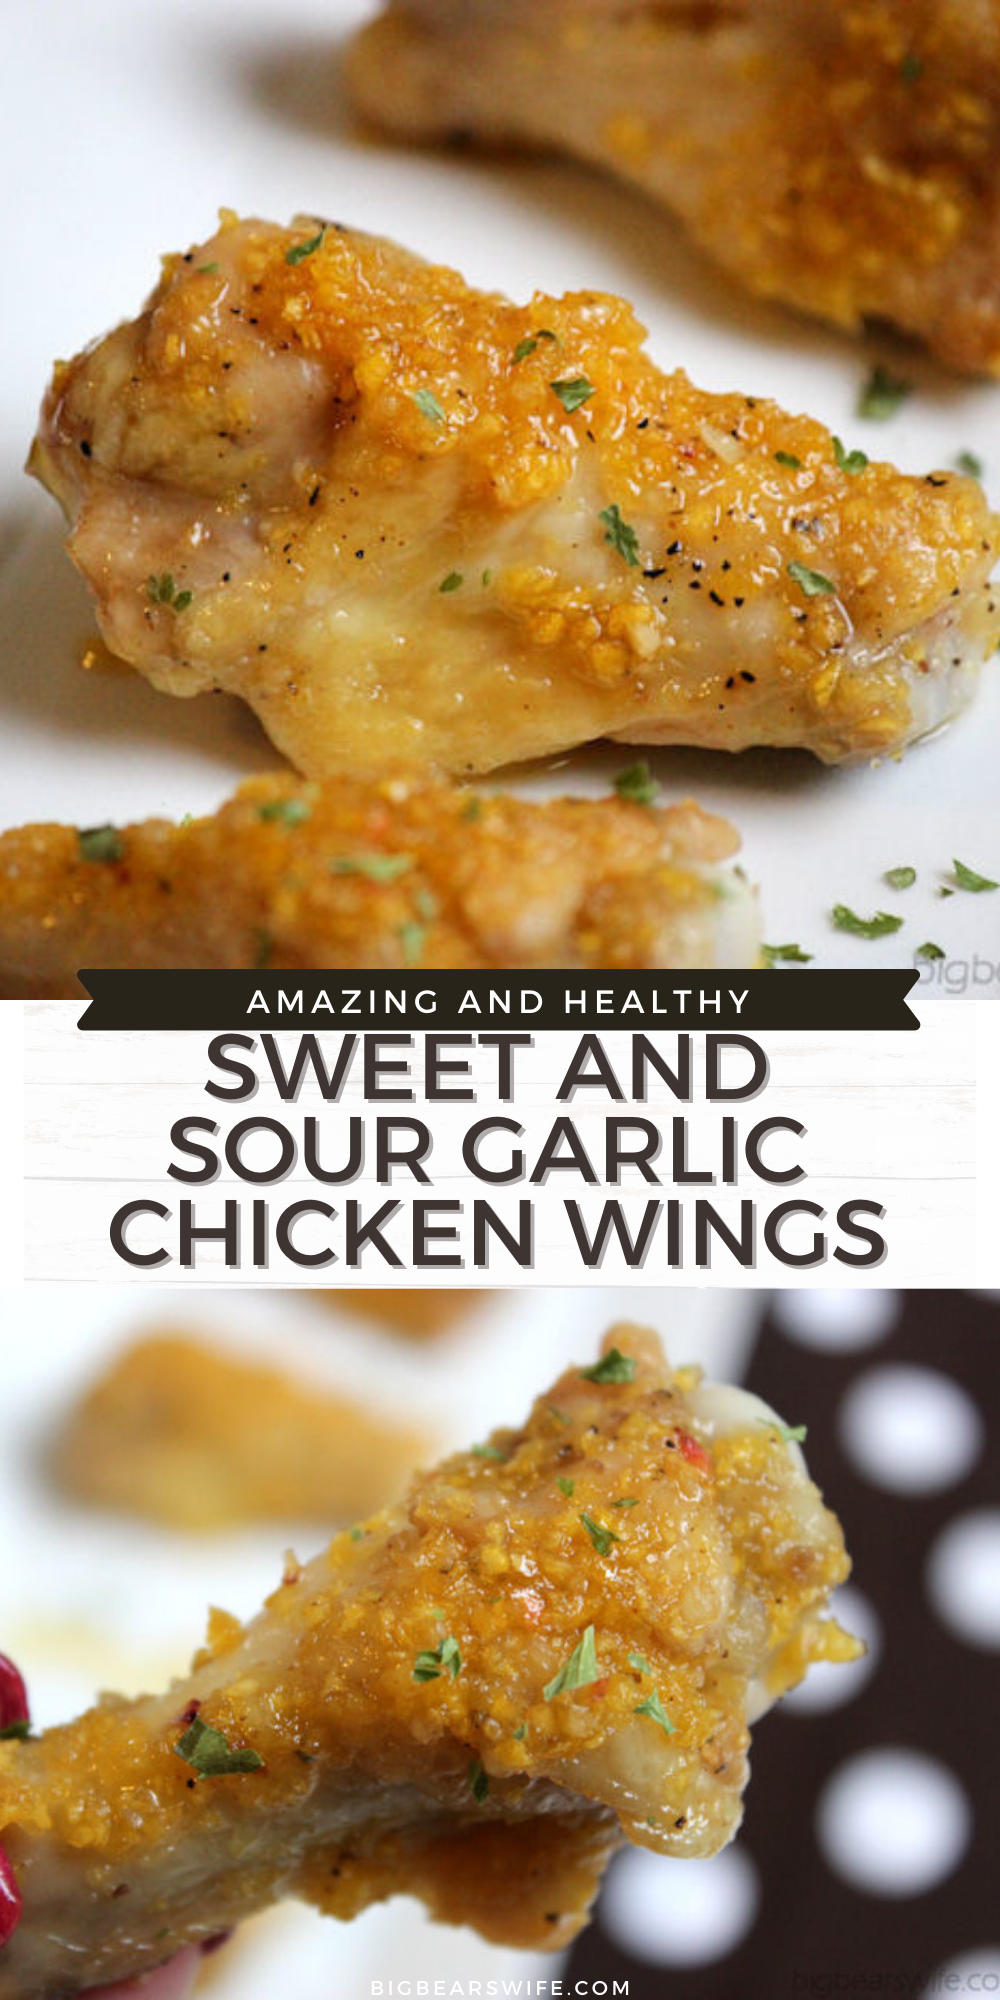  Perfect Sweet and Sour Garlic Chicken Wings for anytime of the year! Make them on Halloween and call them "bat wings" via @bigbearswife